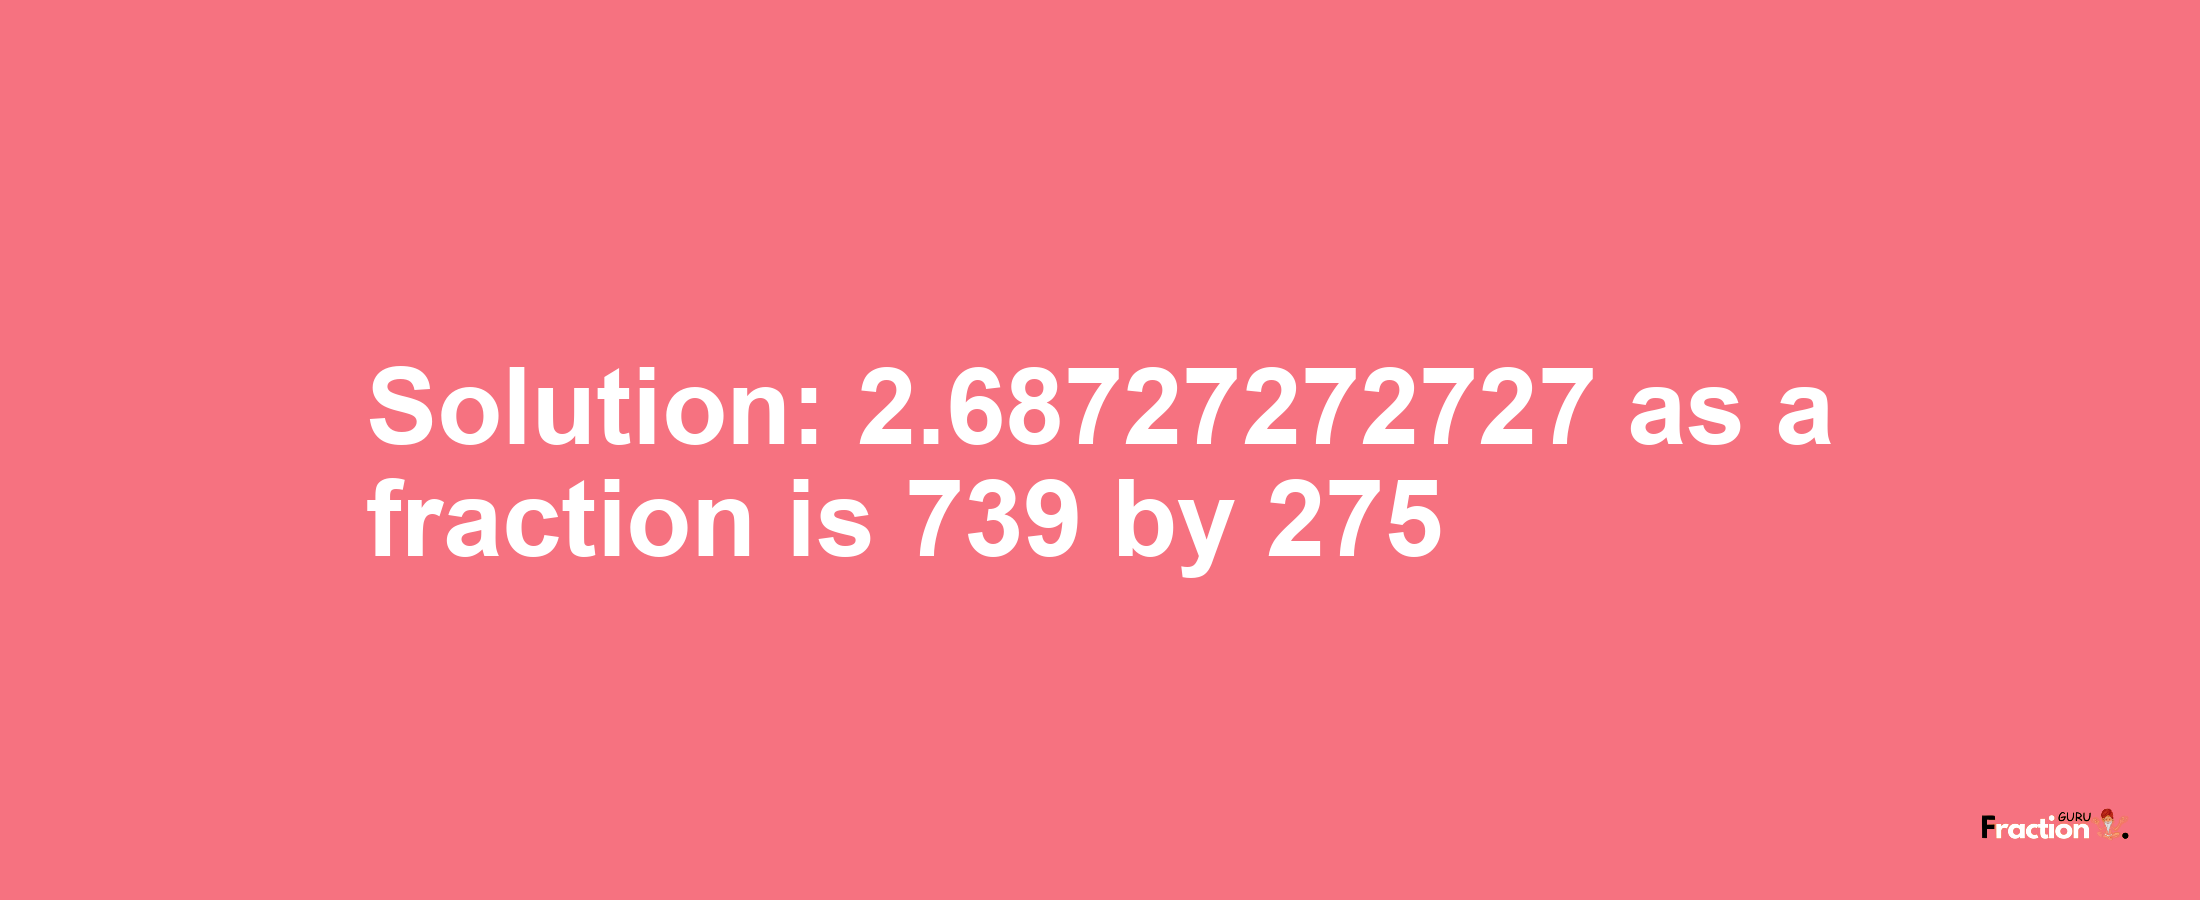 Solution:2.68727272727 as a fraction is 739/275